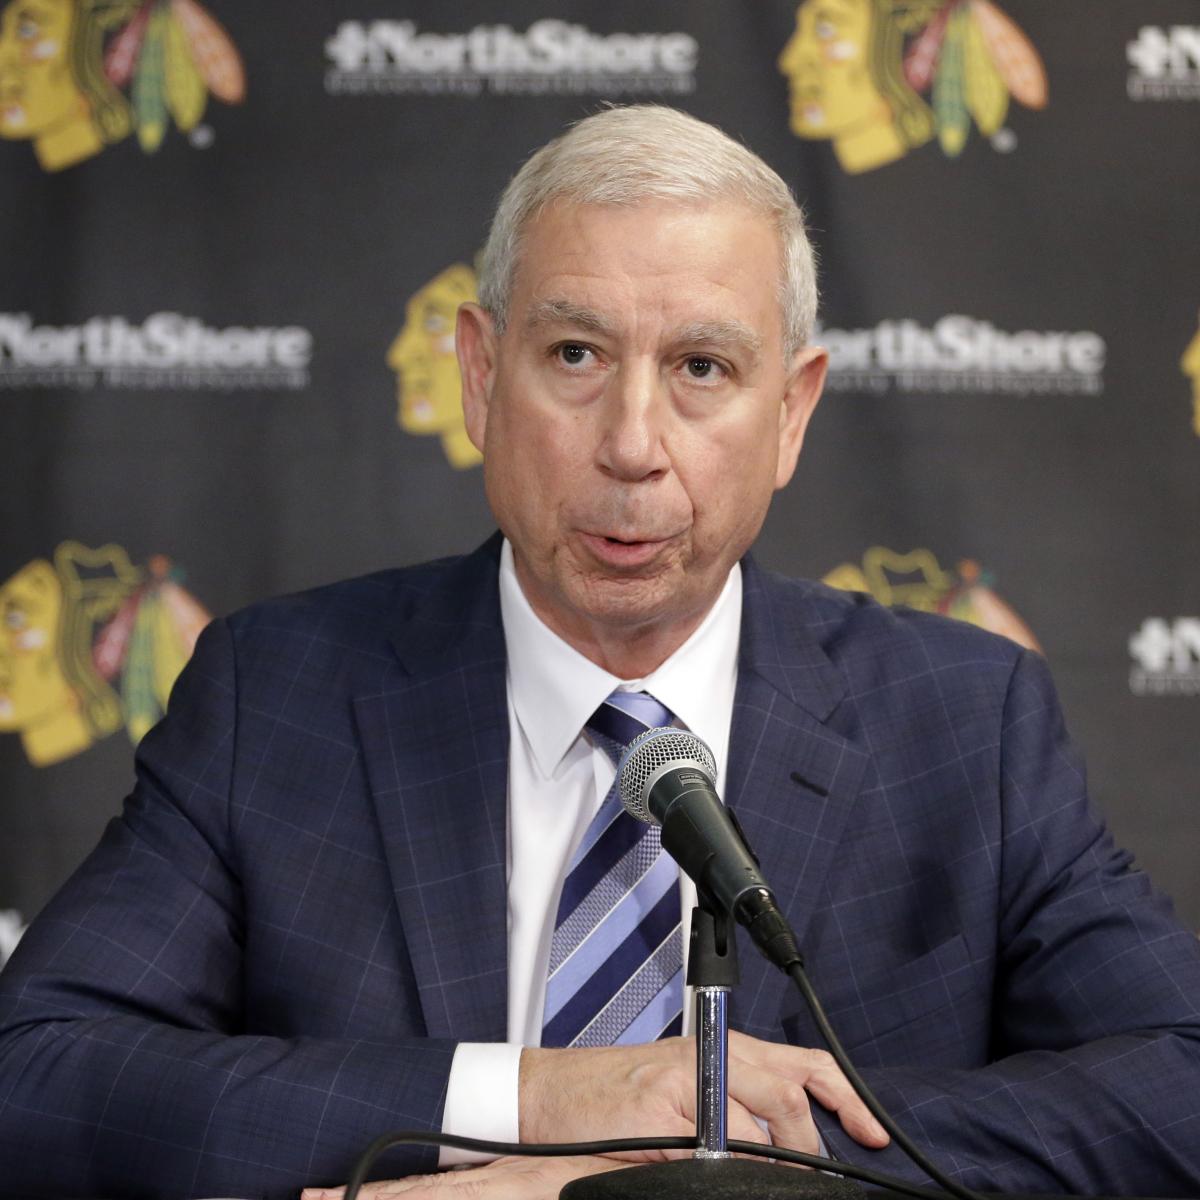 3 Former Chicago Blackhawks to Help Team with General Manager Search, Chicago News